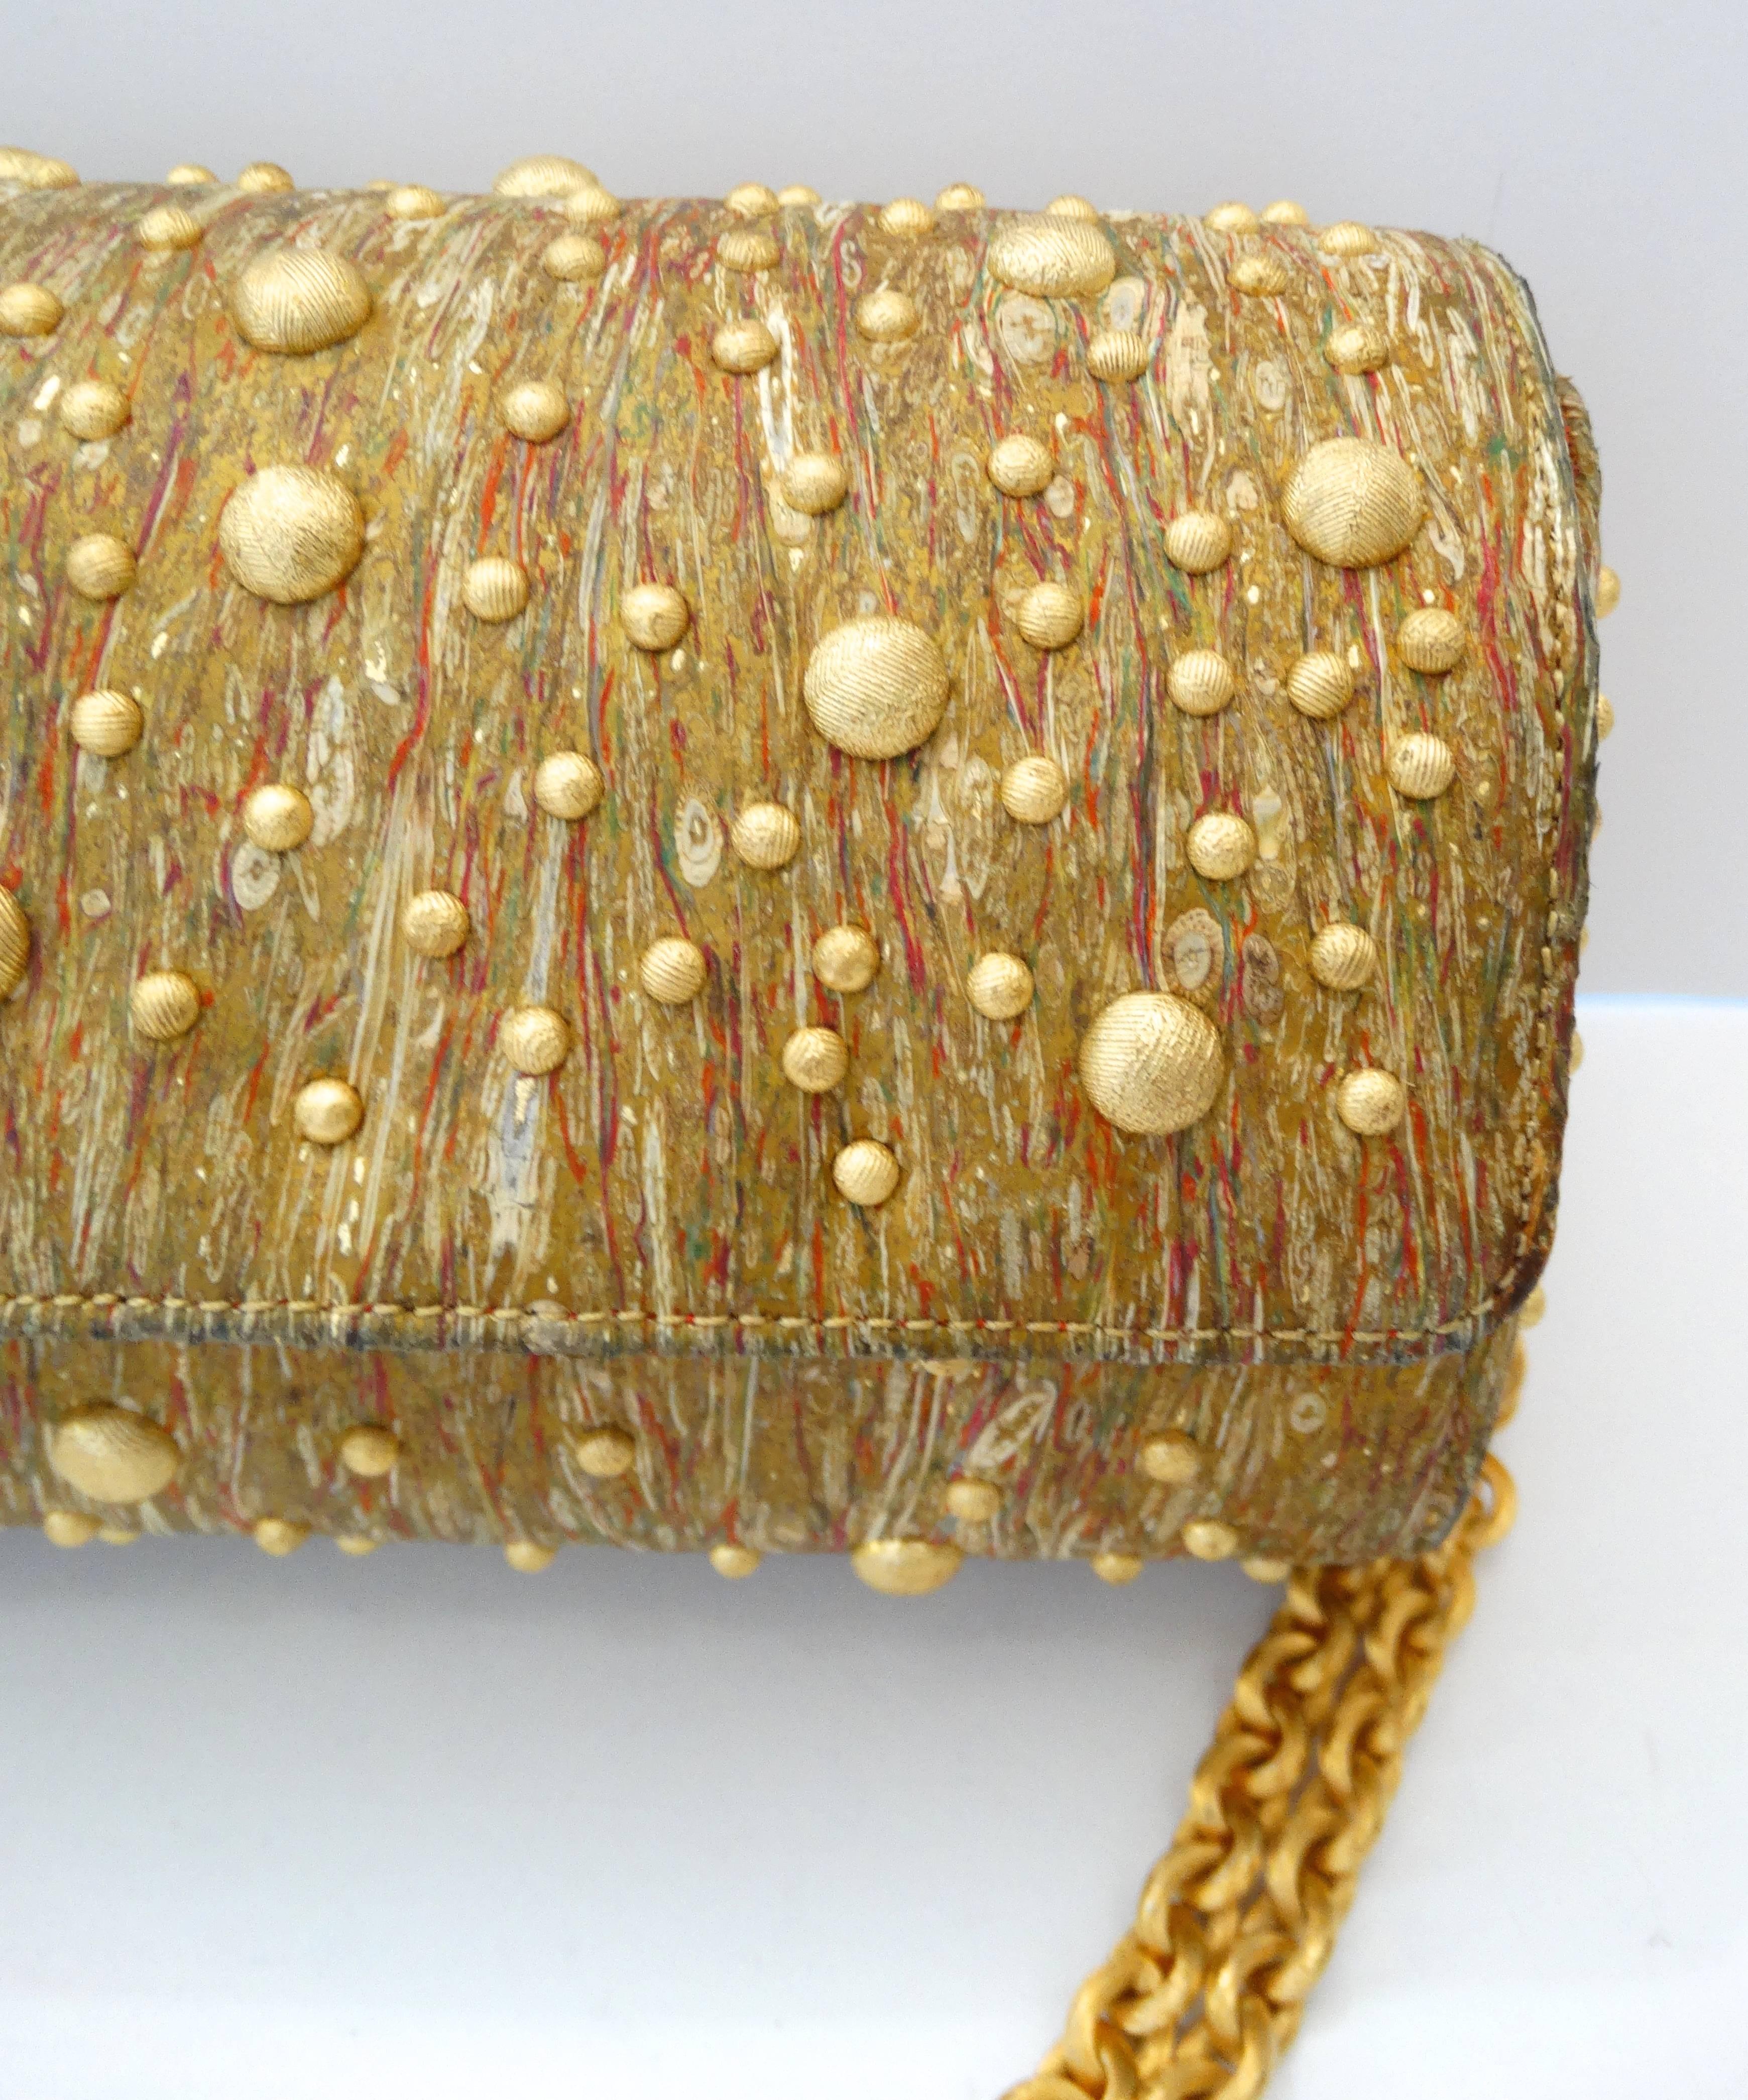 Amazing gold evening bag from the 1980s! Made of a gold toned fabric, accented with stripes of paint like textures. Covered in rounded gold metal studs throughout. Cylindrical shape, snaps into place with the top flap. Matching gold metal doubled up